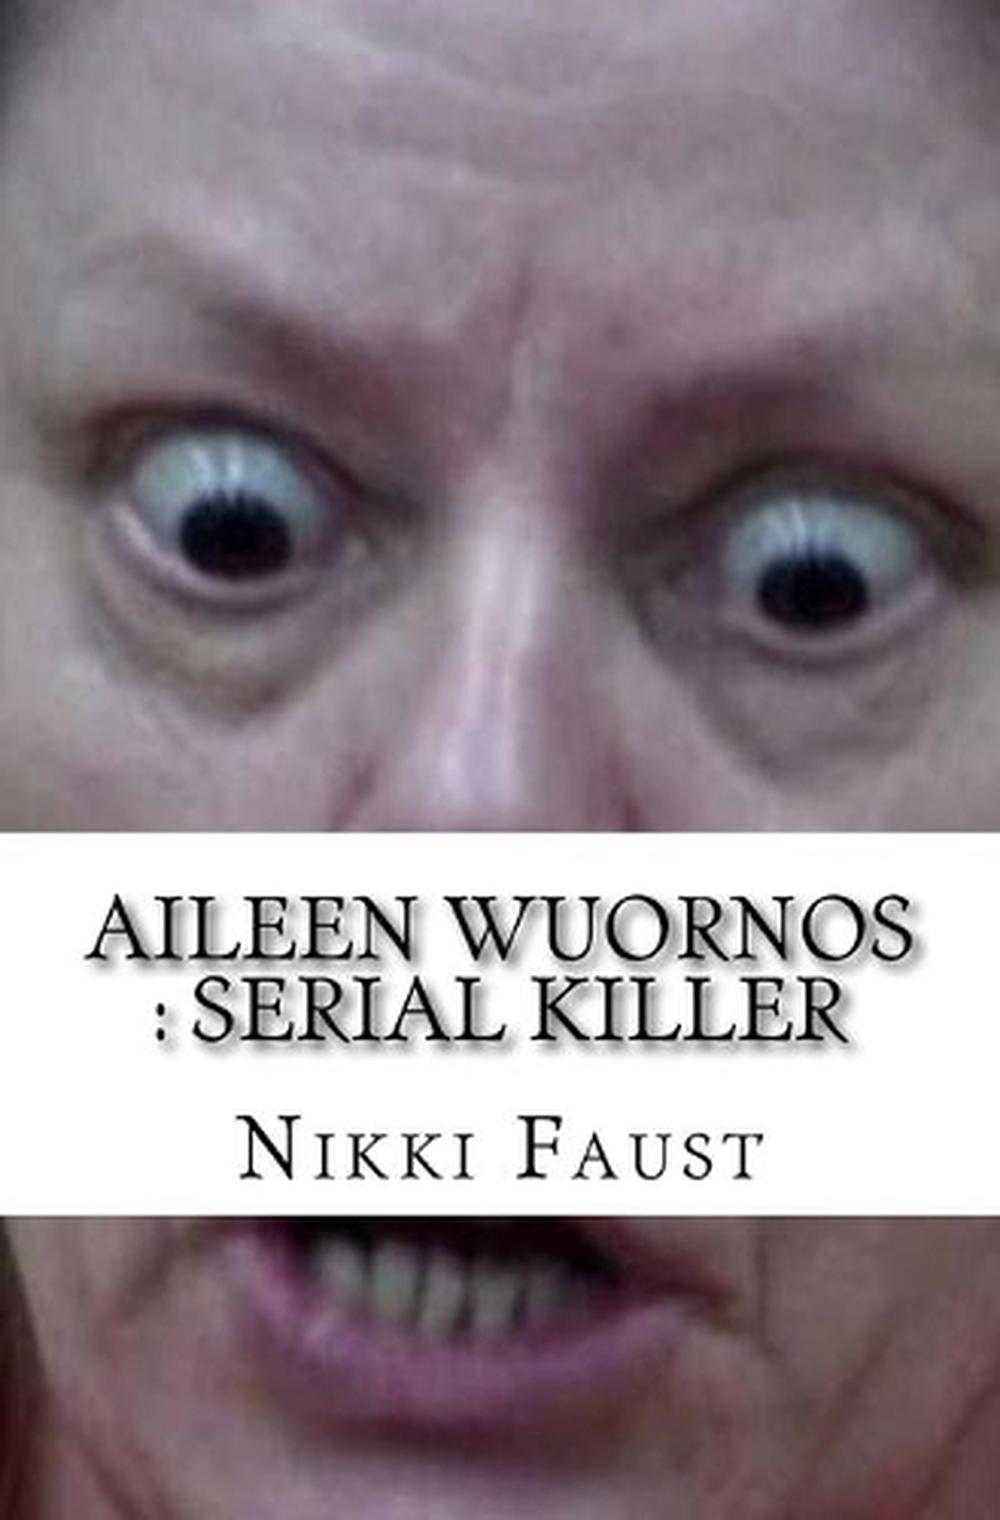 Details About Aileen Wuornos Serial Killer By Nikki Faust English Paperback Book Free Shipp